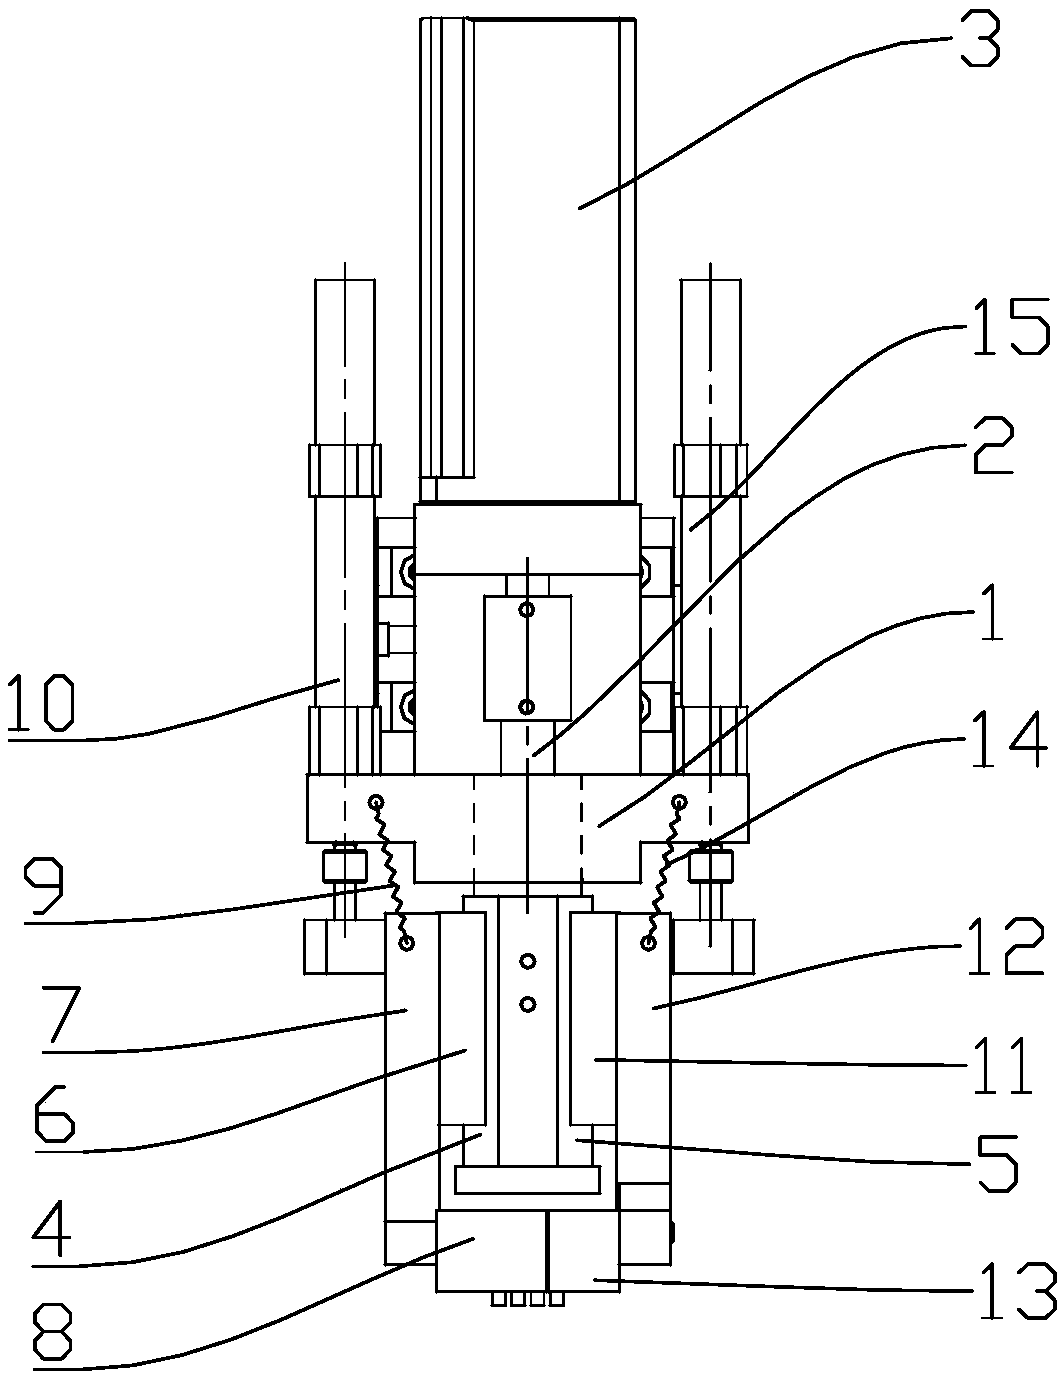 Rotary suction nozzle device